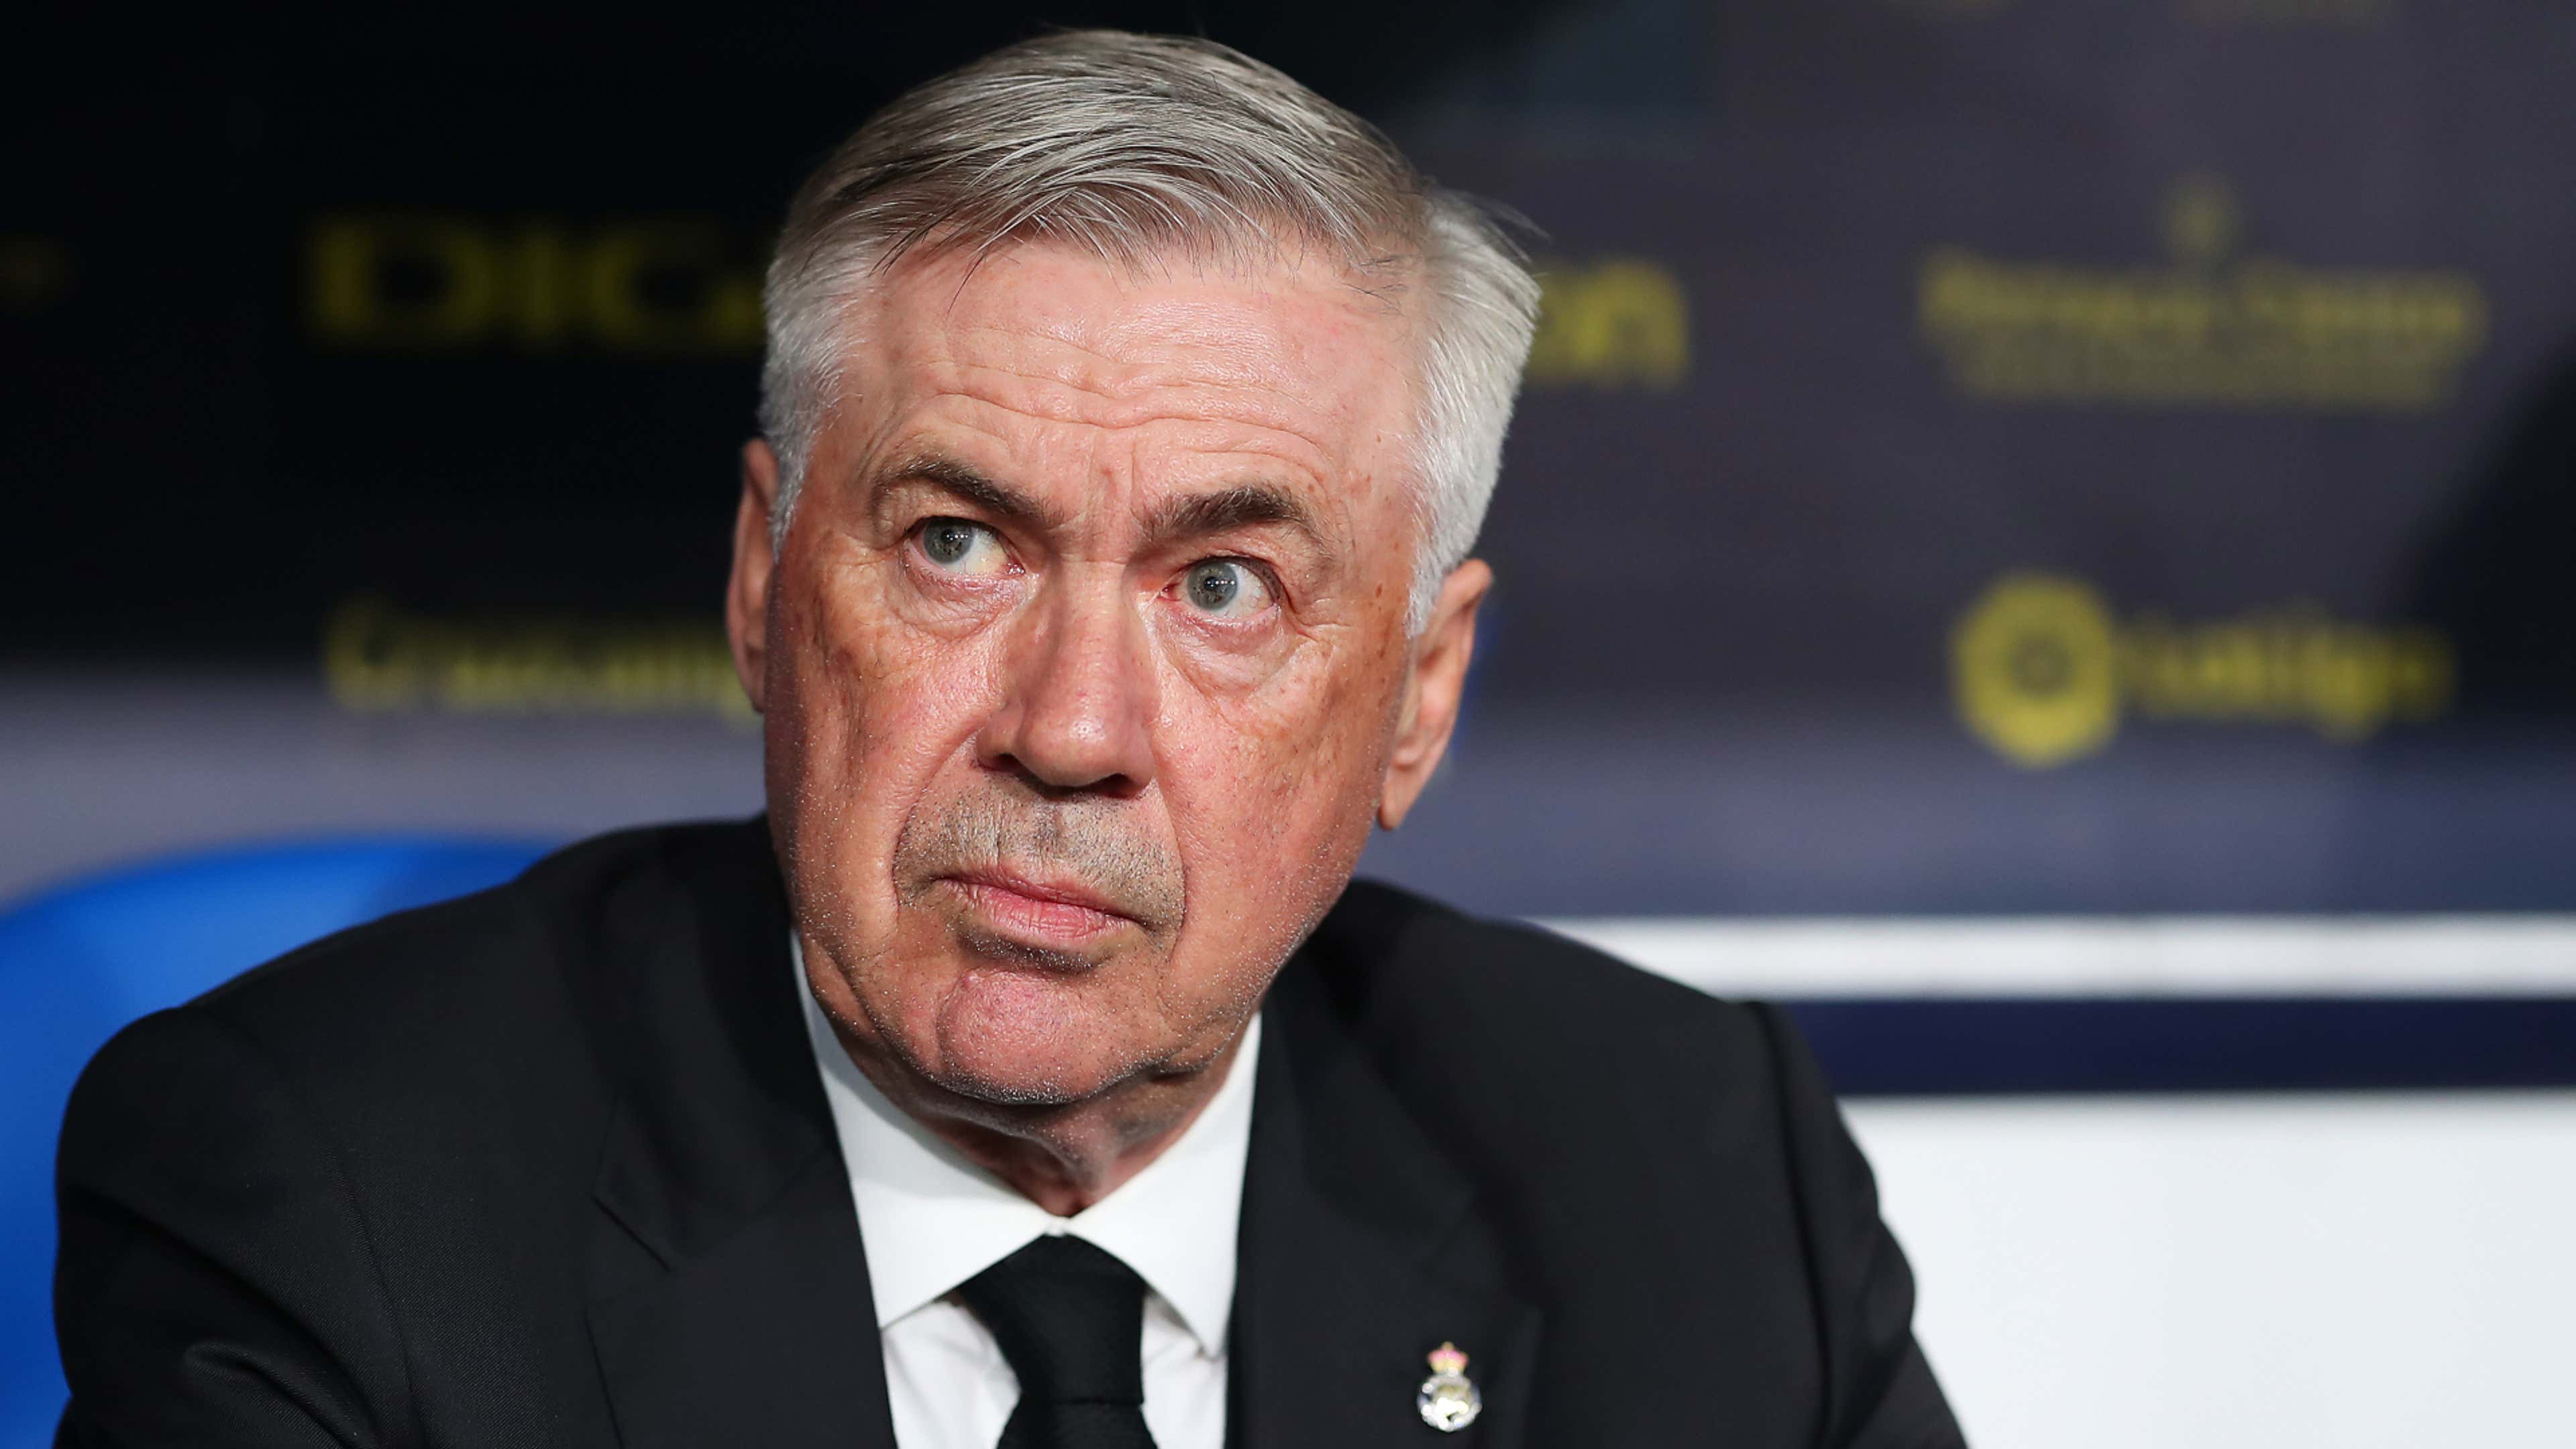 Carlo Ancelotti is heading to Brazil! CBF reaches agreement for Real ...